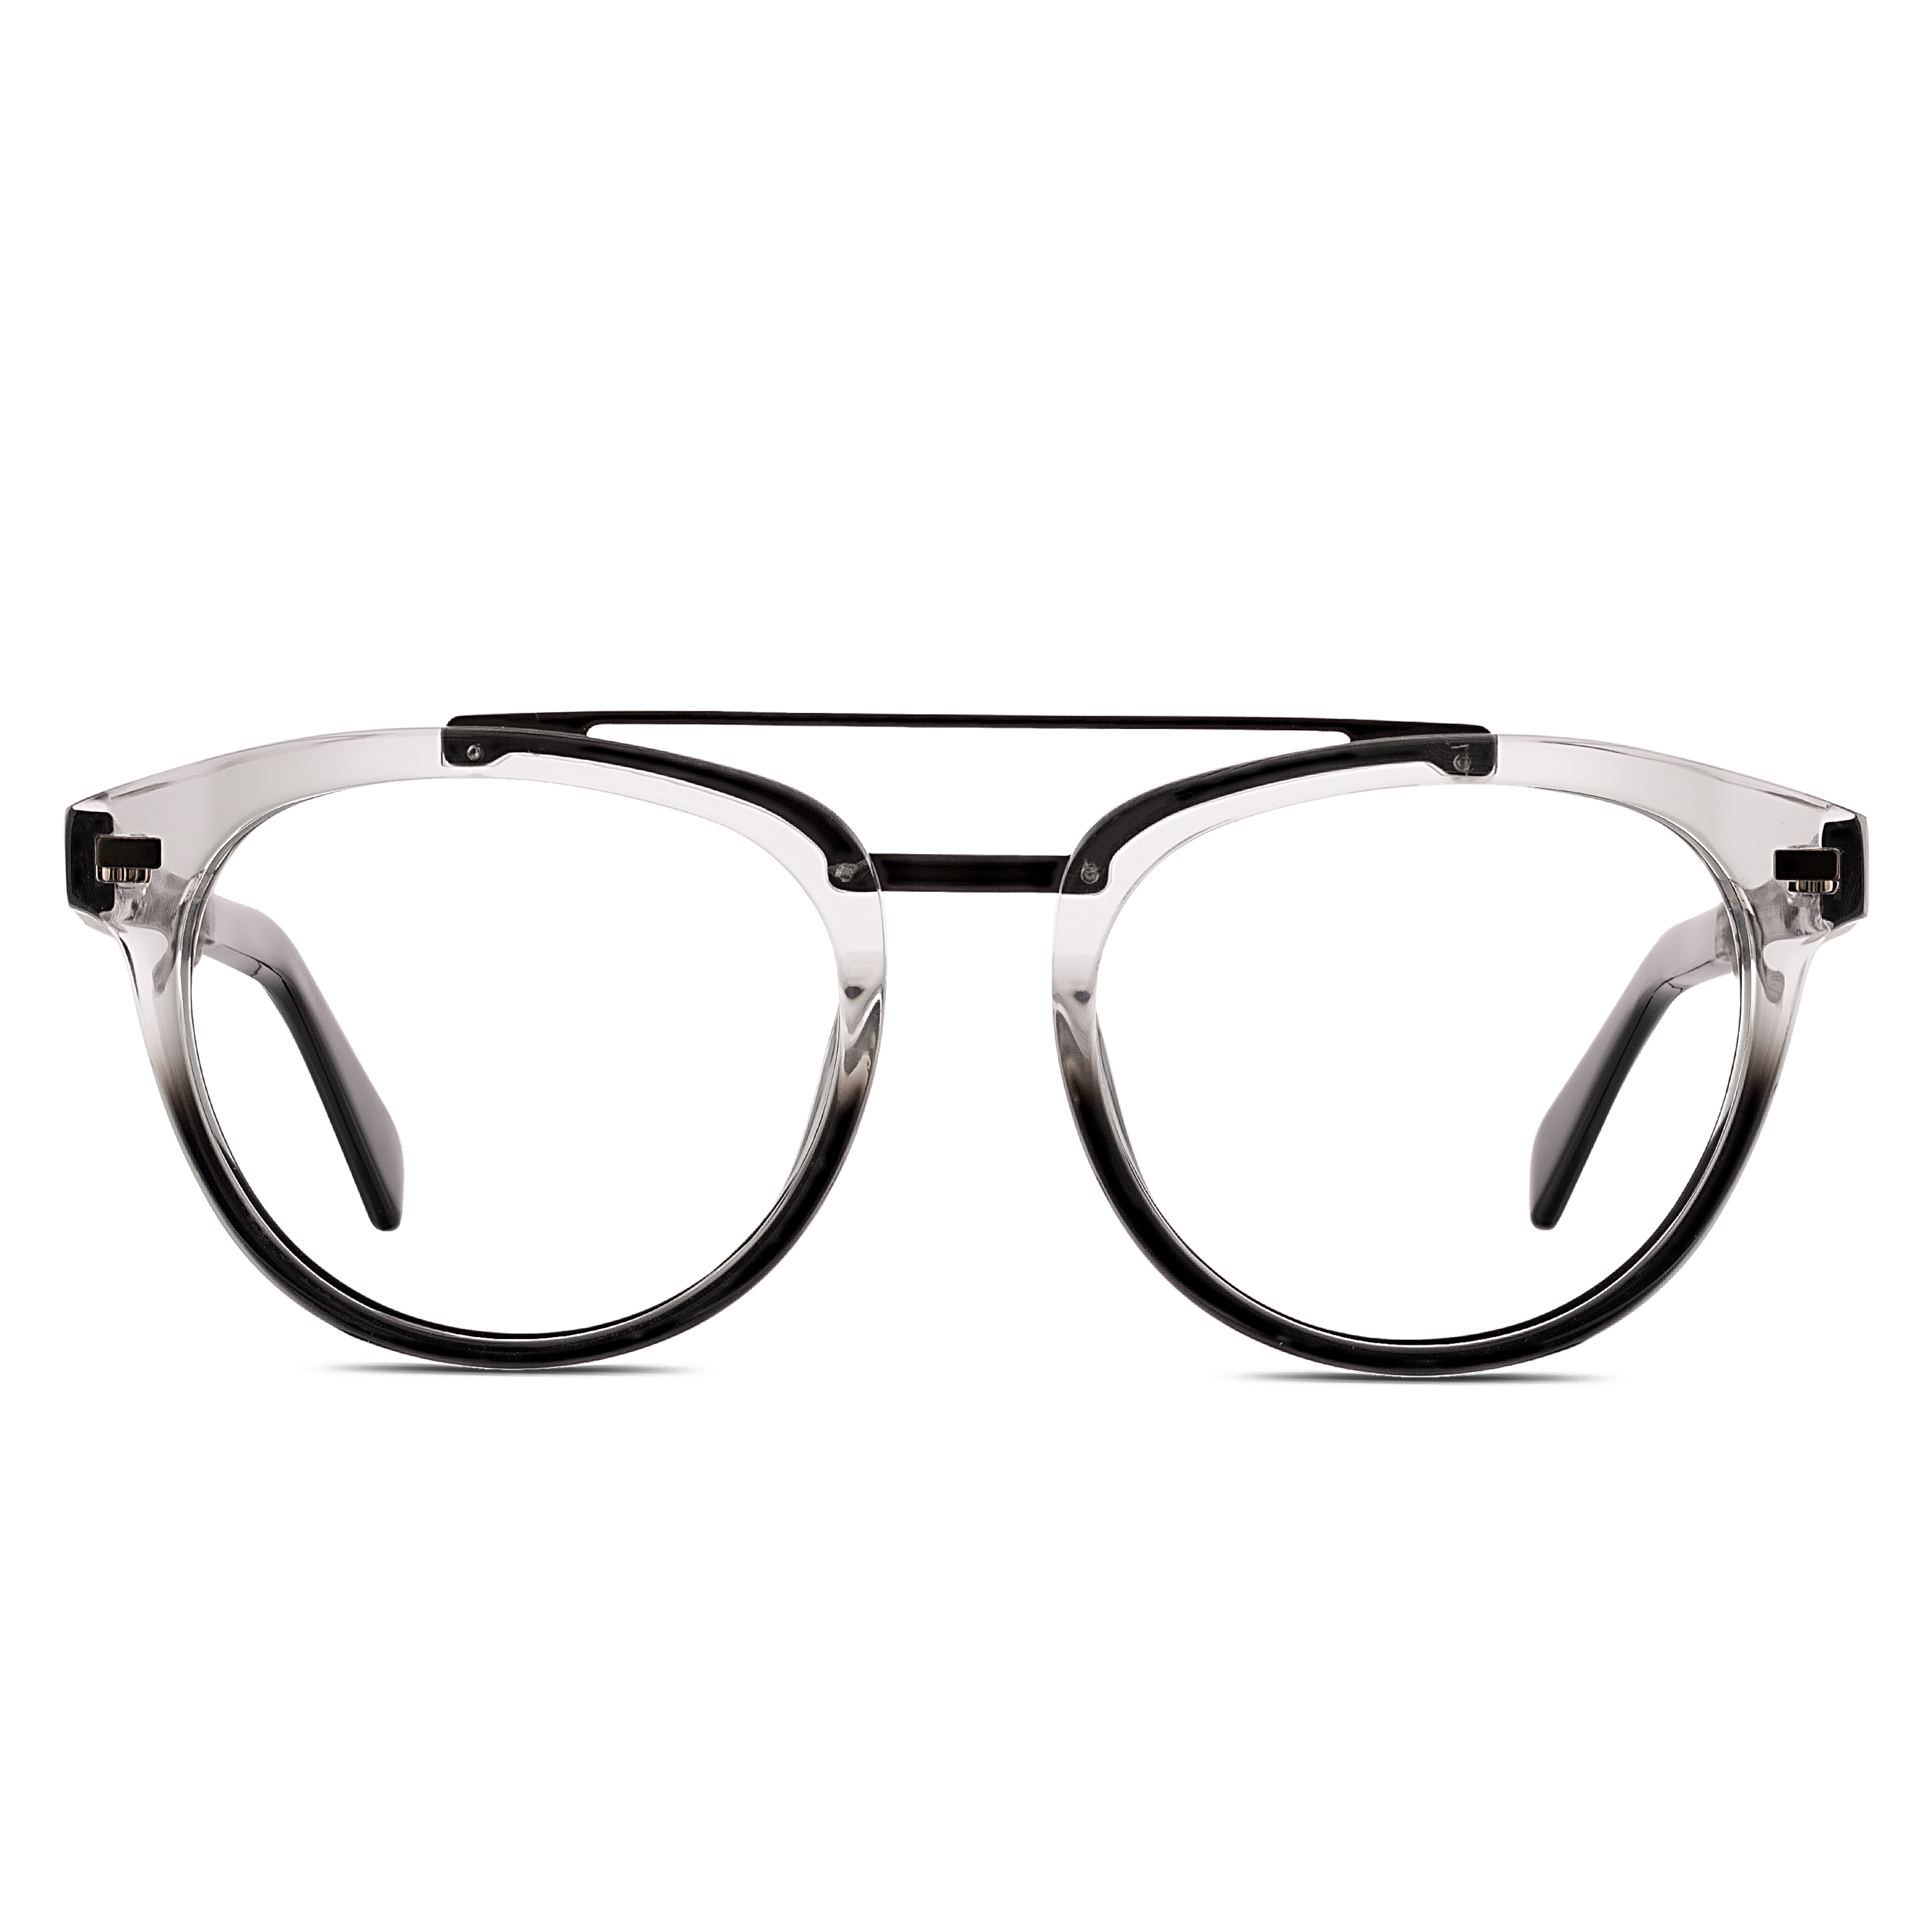 Captain Eyeglasses by Johnny Fly | 